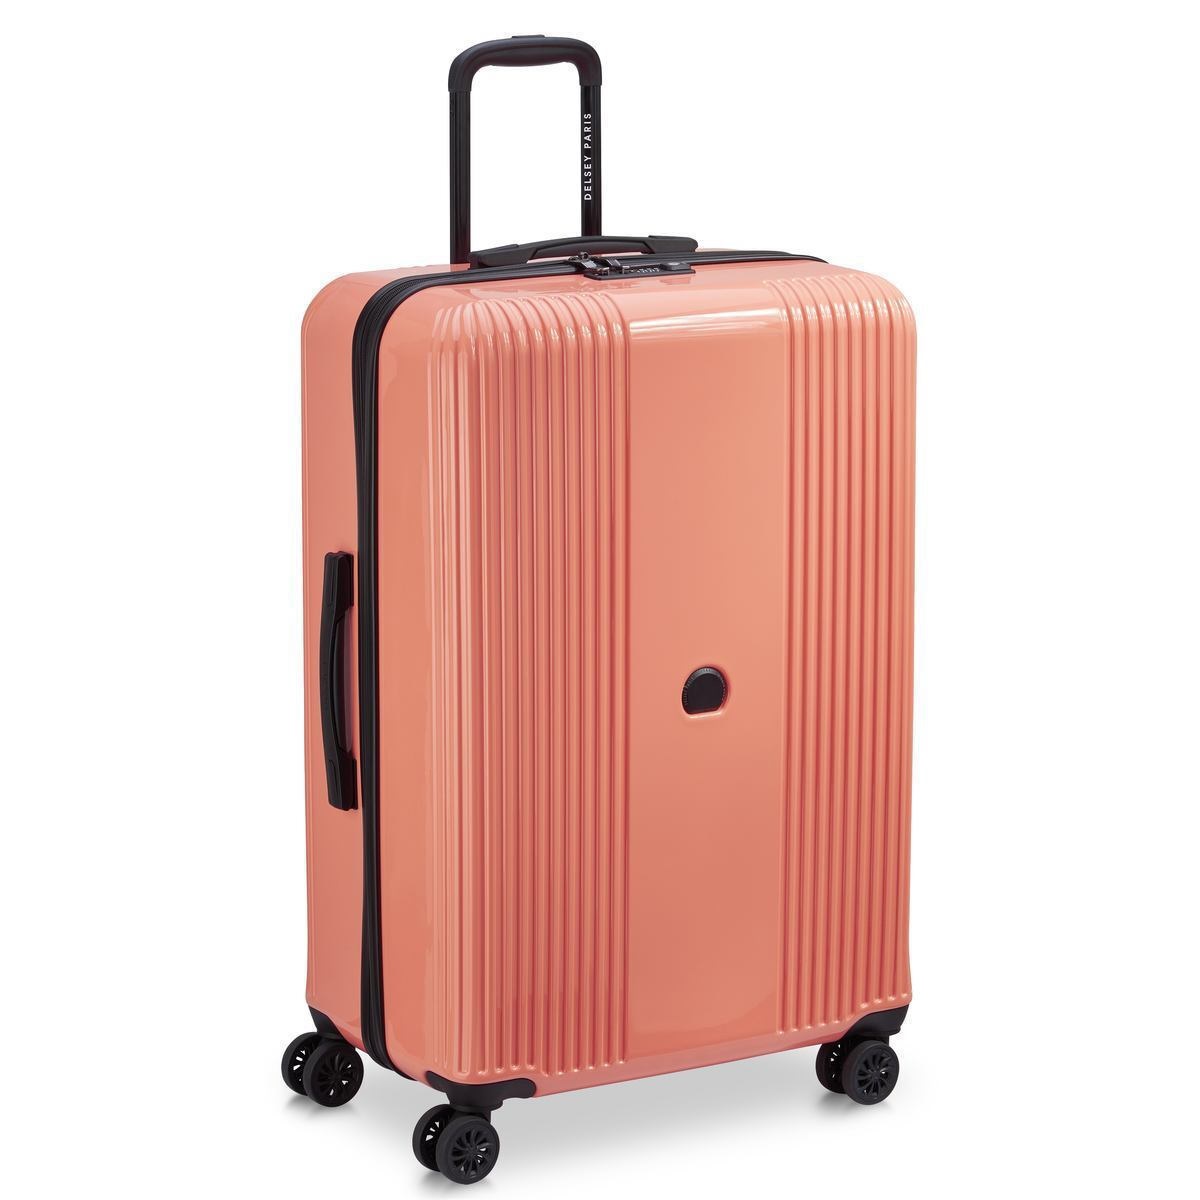 VALI DELSEY PARIS LARGE TRUNK OPHELIE 4 DOUBLE WHEEL EXPANDABLE TROLLEY CORAL PINK SUITCASE 7